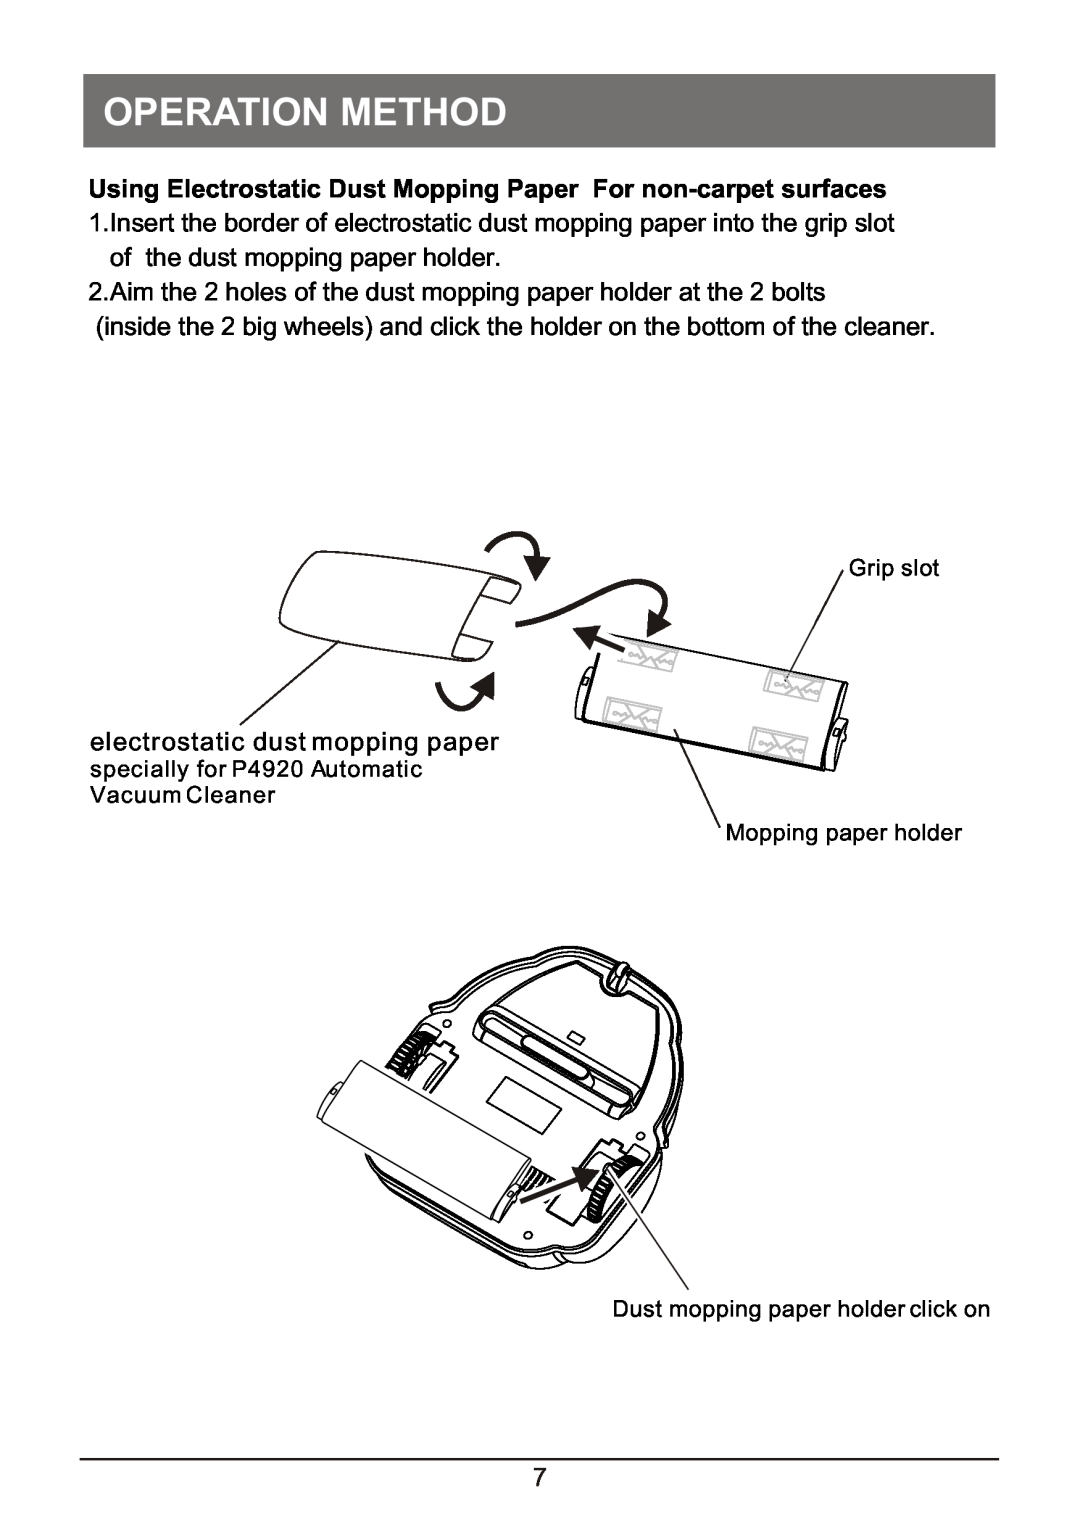 P3 International P4920 operation manual Operation Method, electrostatic dust mopping paper 